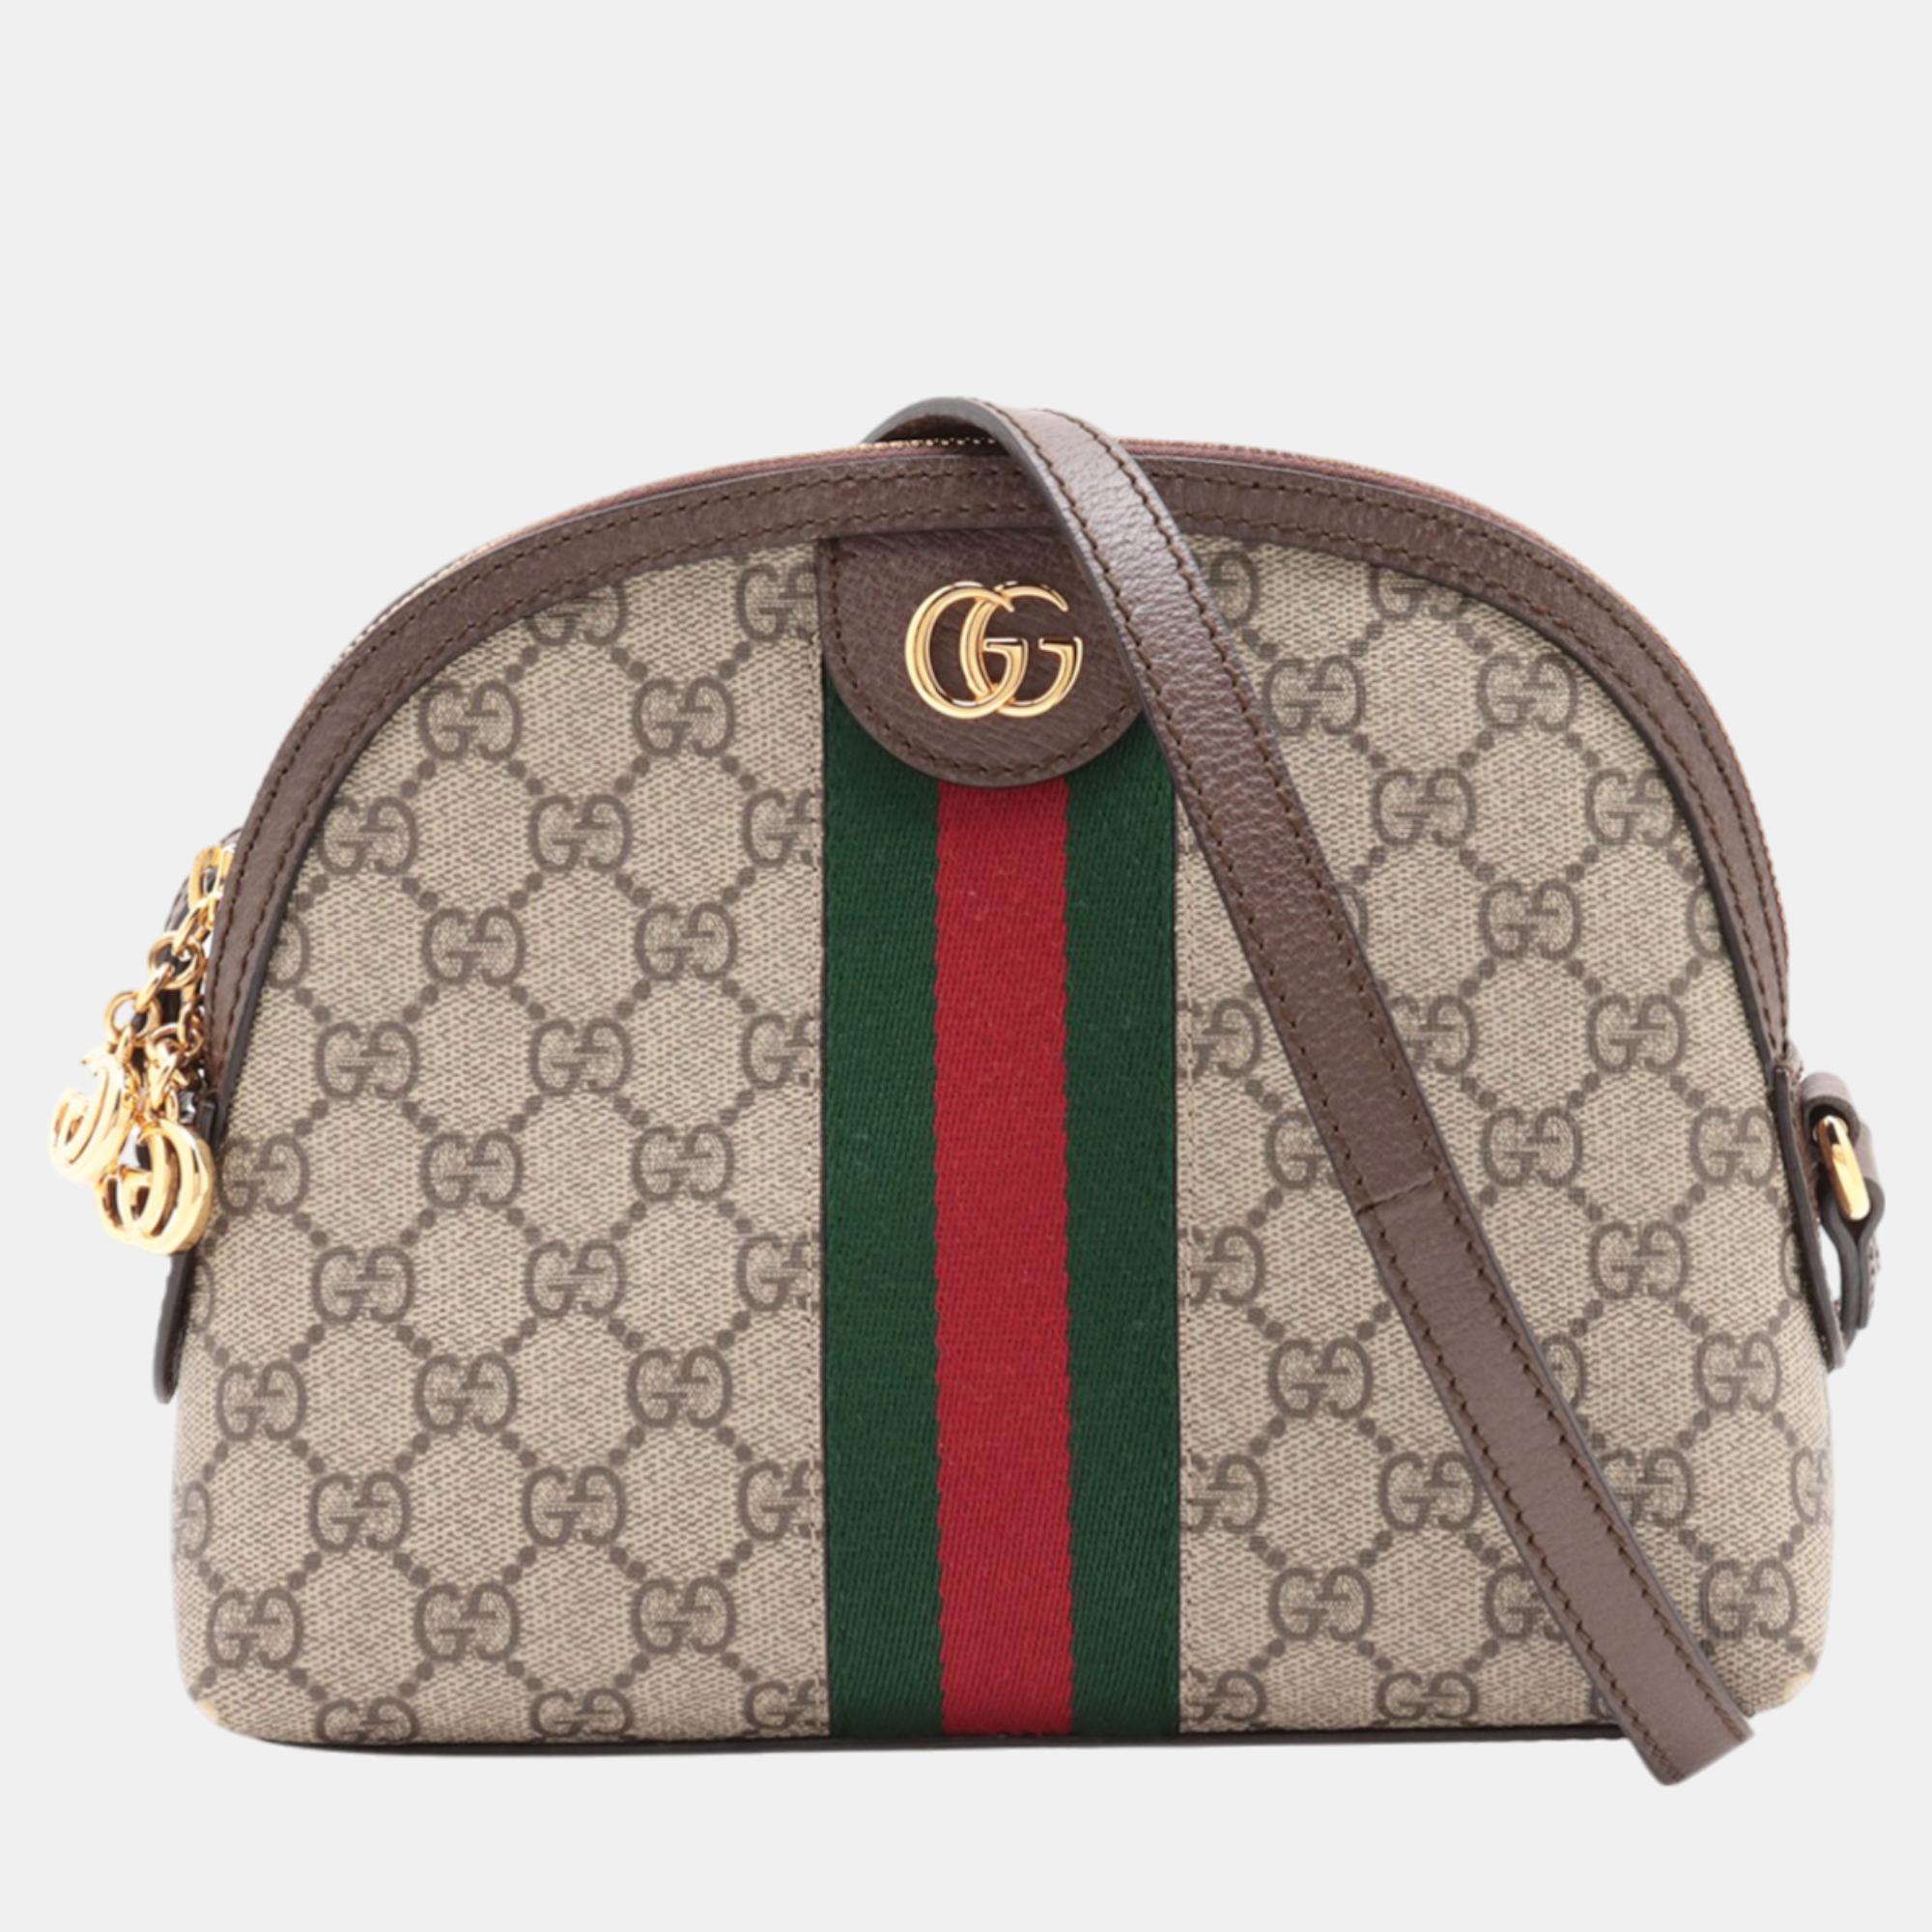 Experience luxury with this Gucci bag. Meticulously crafted with the best materials its a timeless piece that will elevate any outfit.